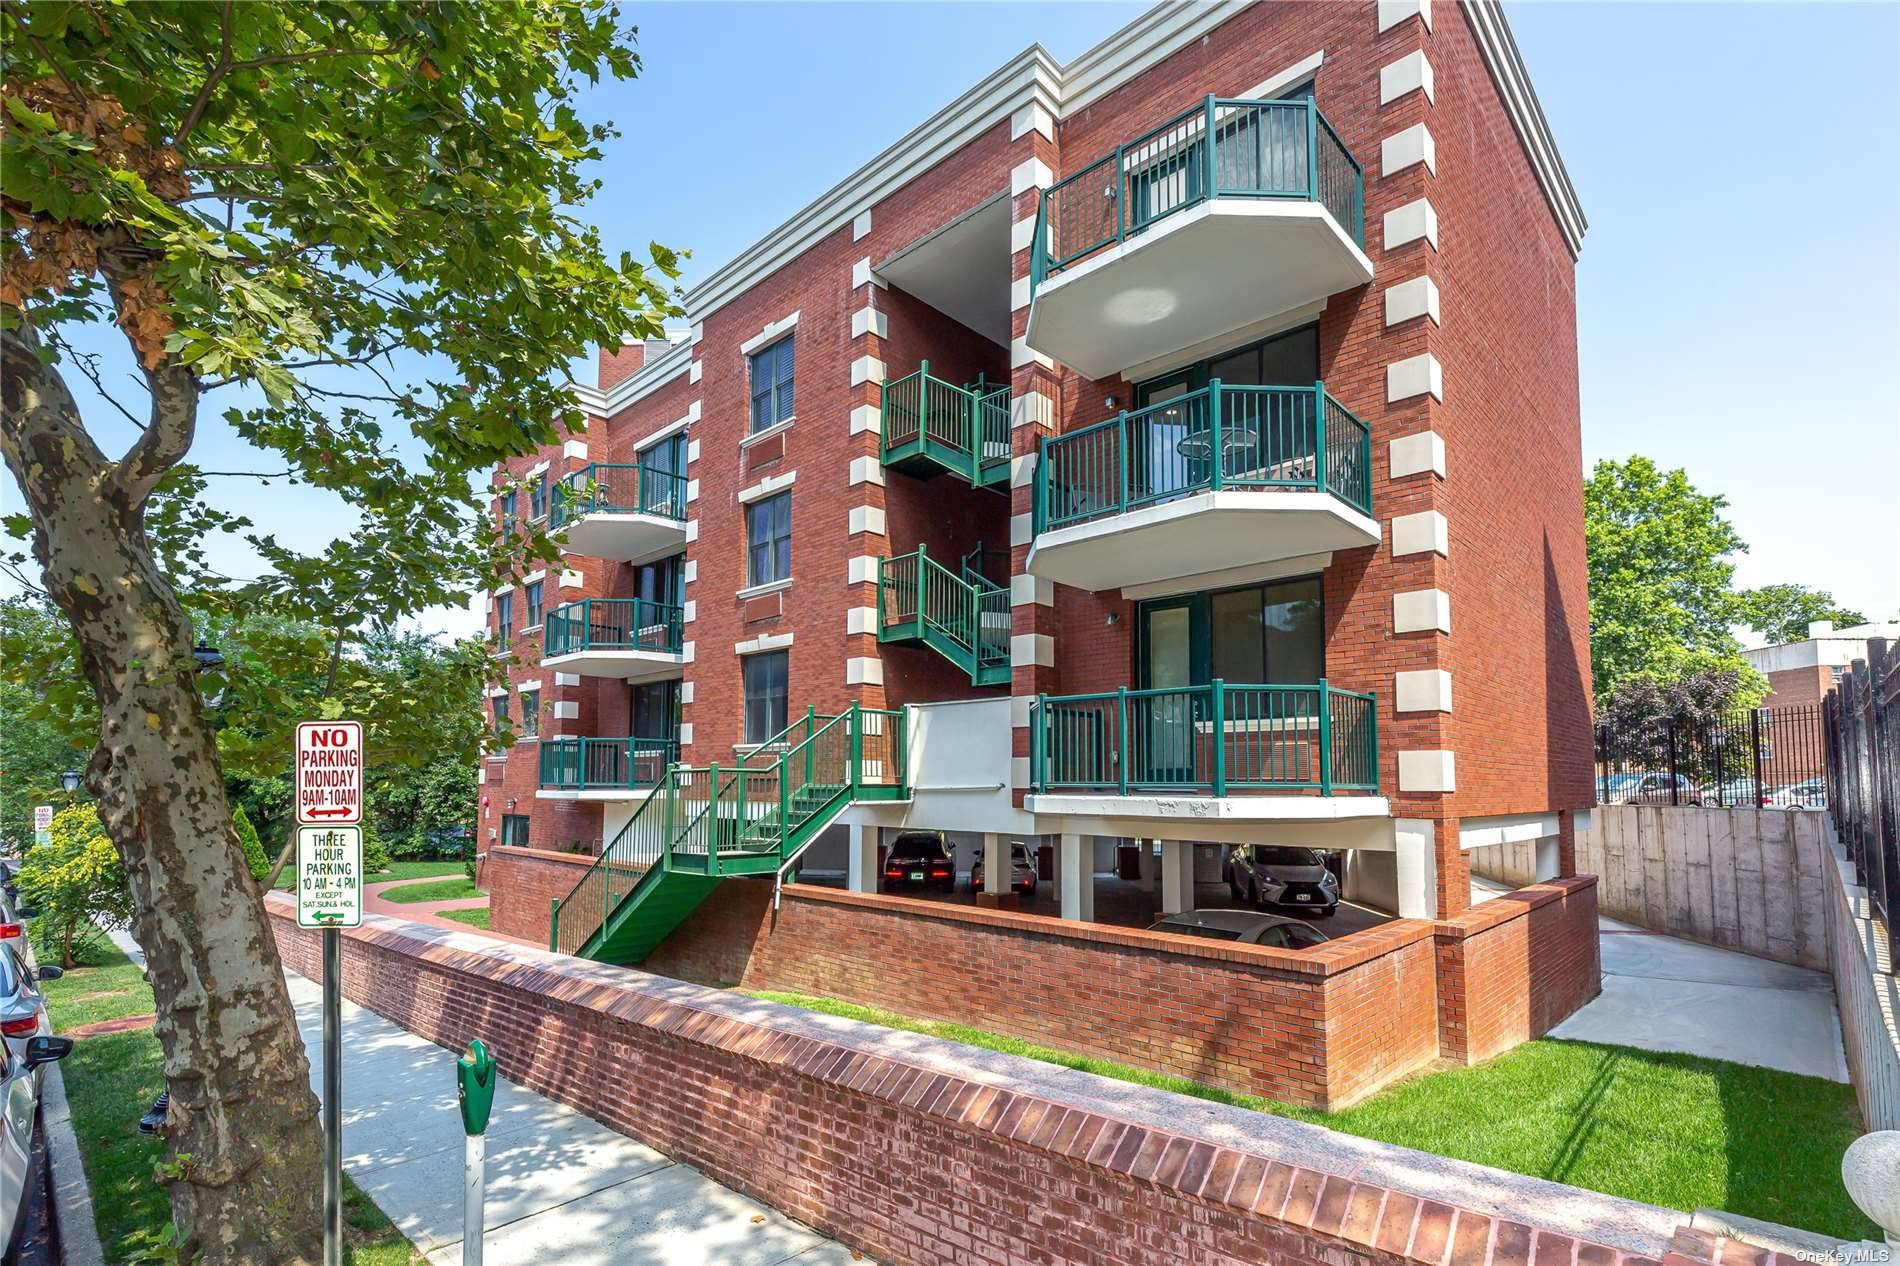 Rare opportunity to own a fully occupied new apartment building !